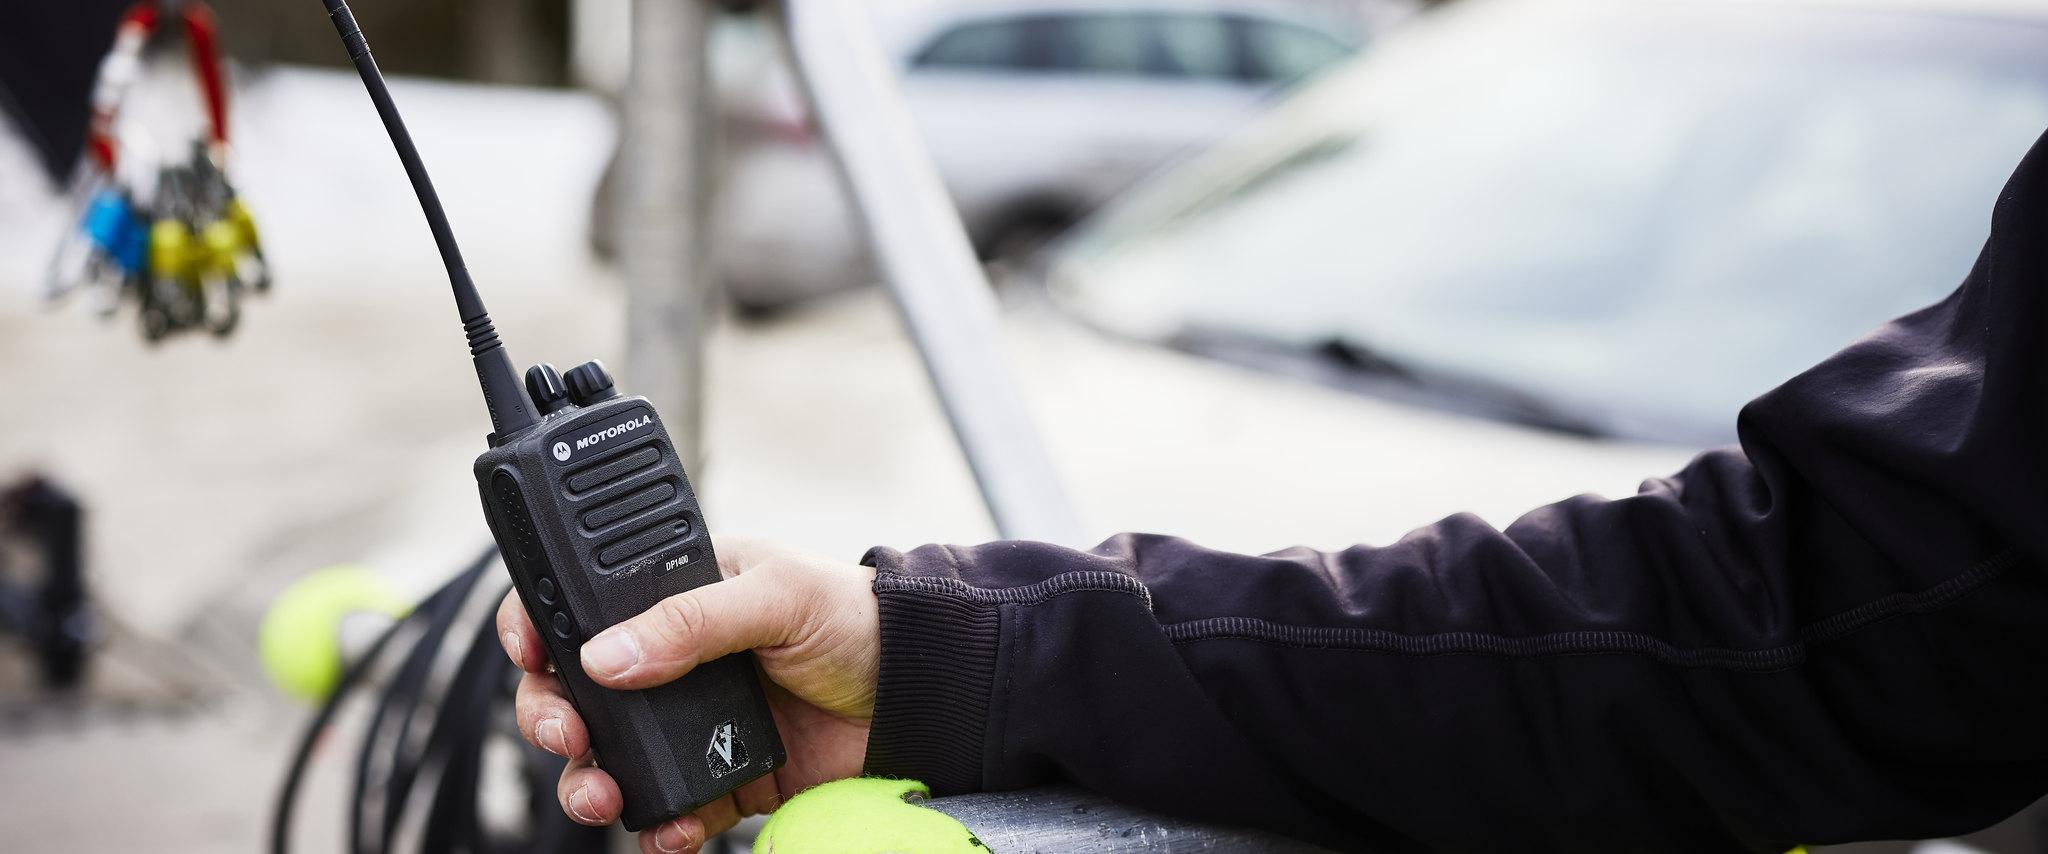 A person's hand holding a Motorla walkie talkie two-way radio on a film set with cars in the background.